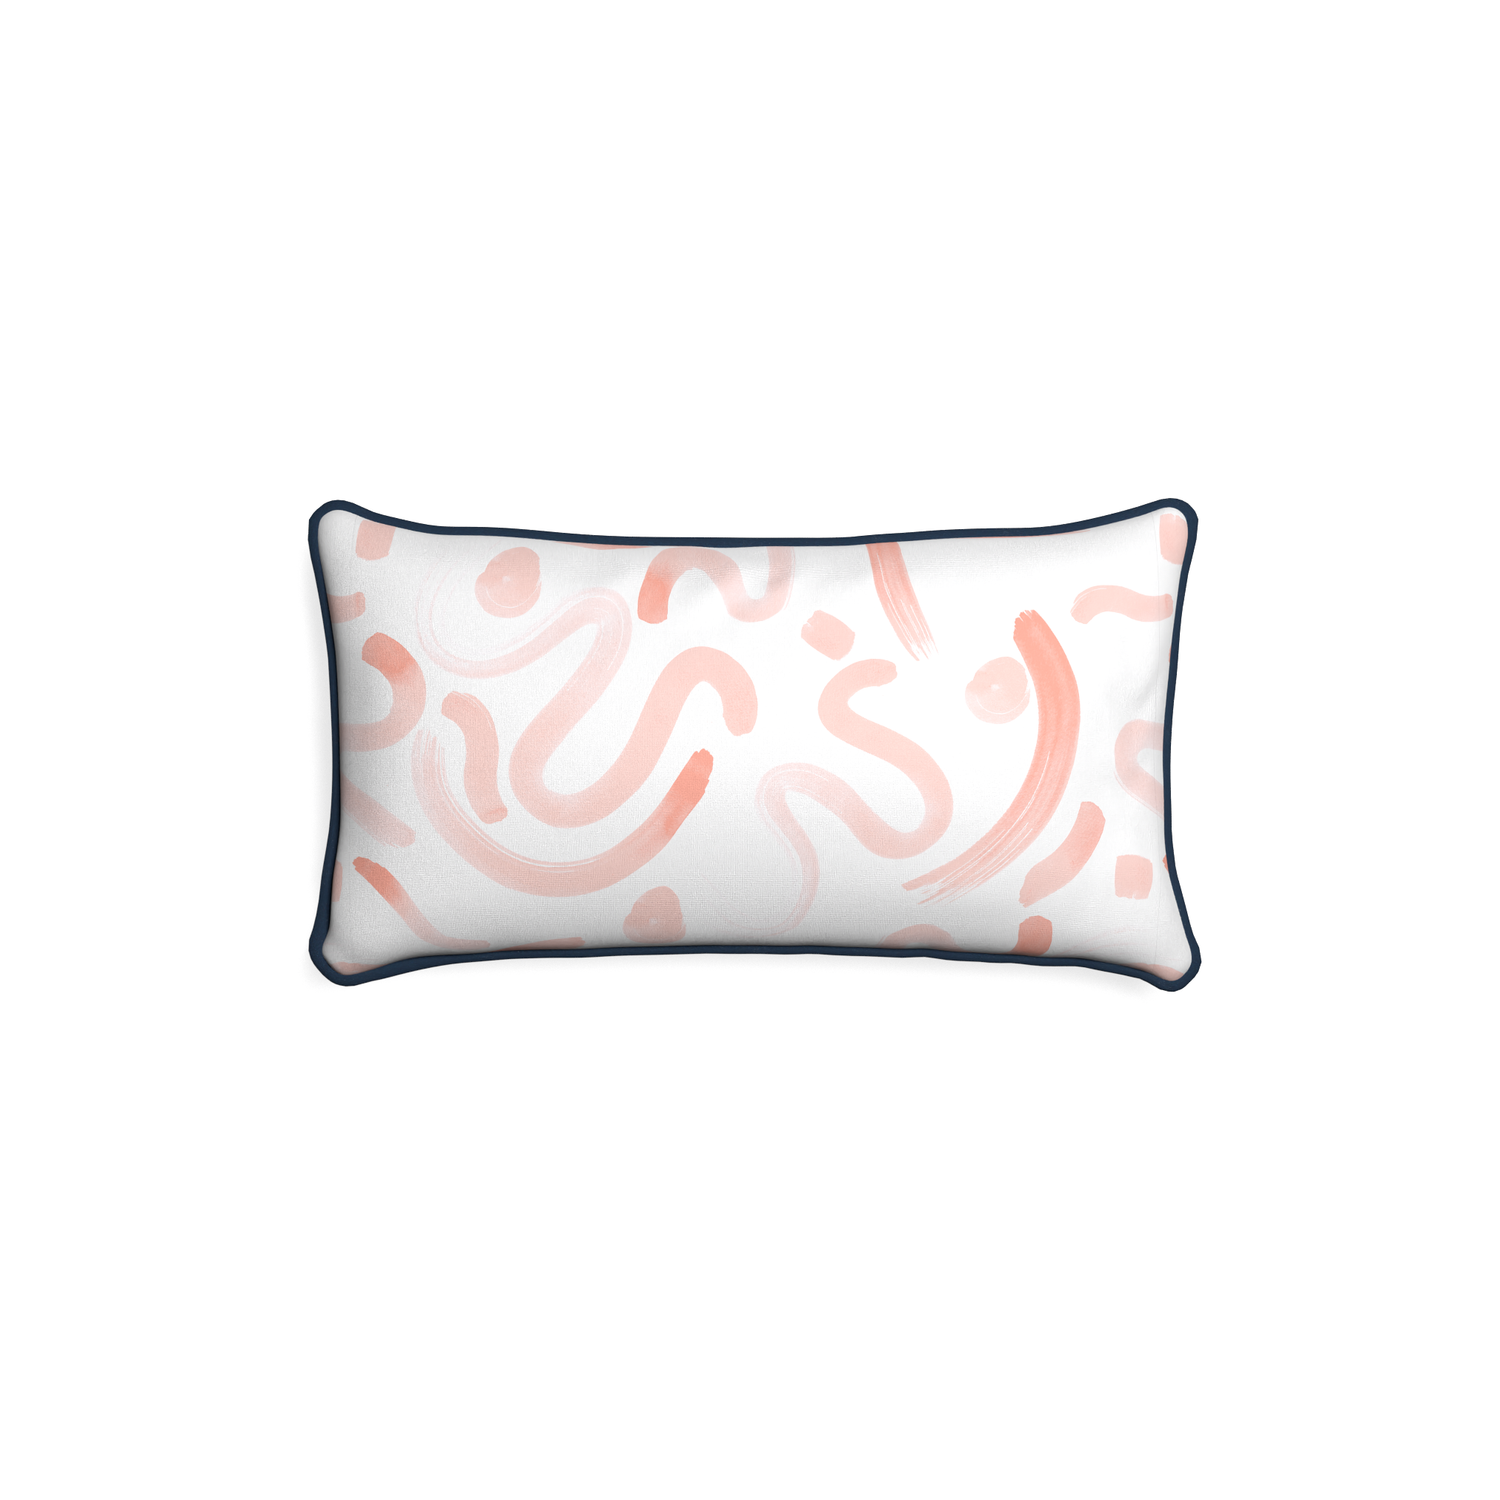 Petite-lumbar hockney pink custom pink graphicpillow with c piping on white background